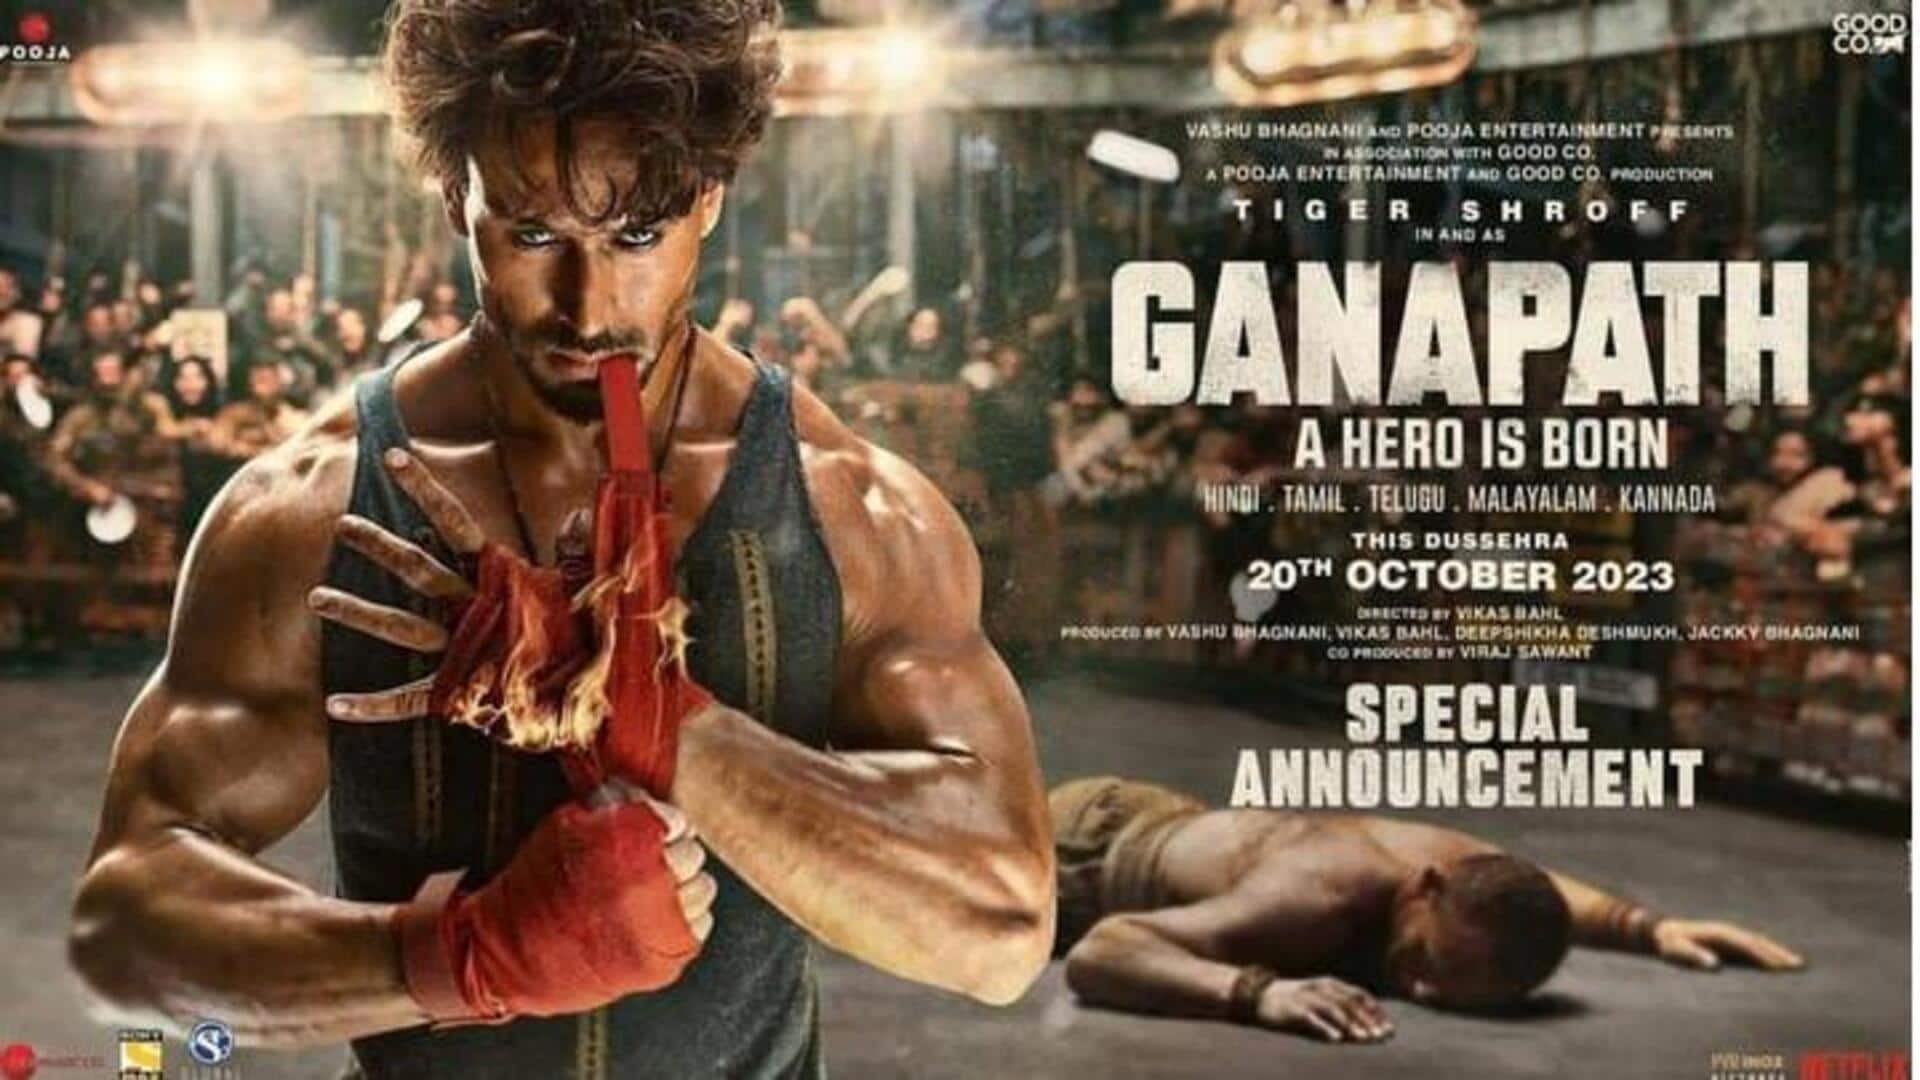 Box office collection: 'Ganapath' finds few takers on Day 1